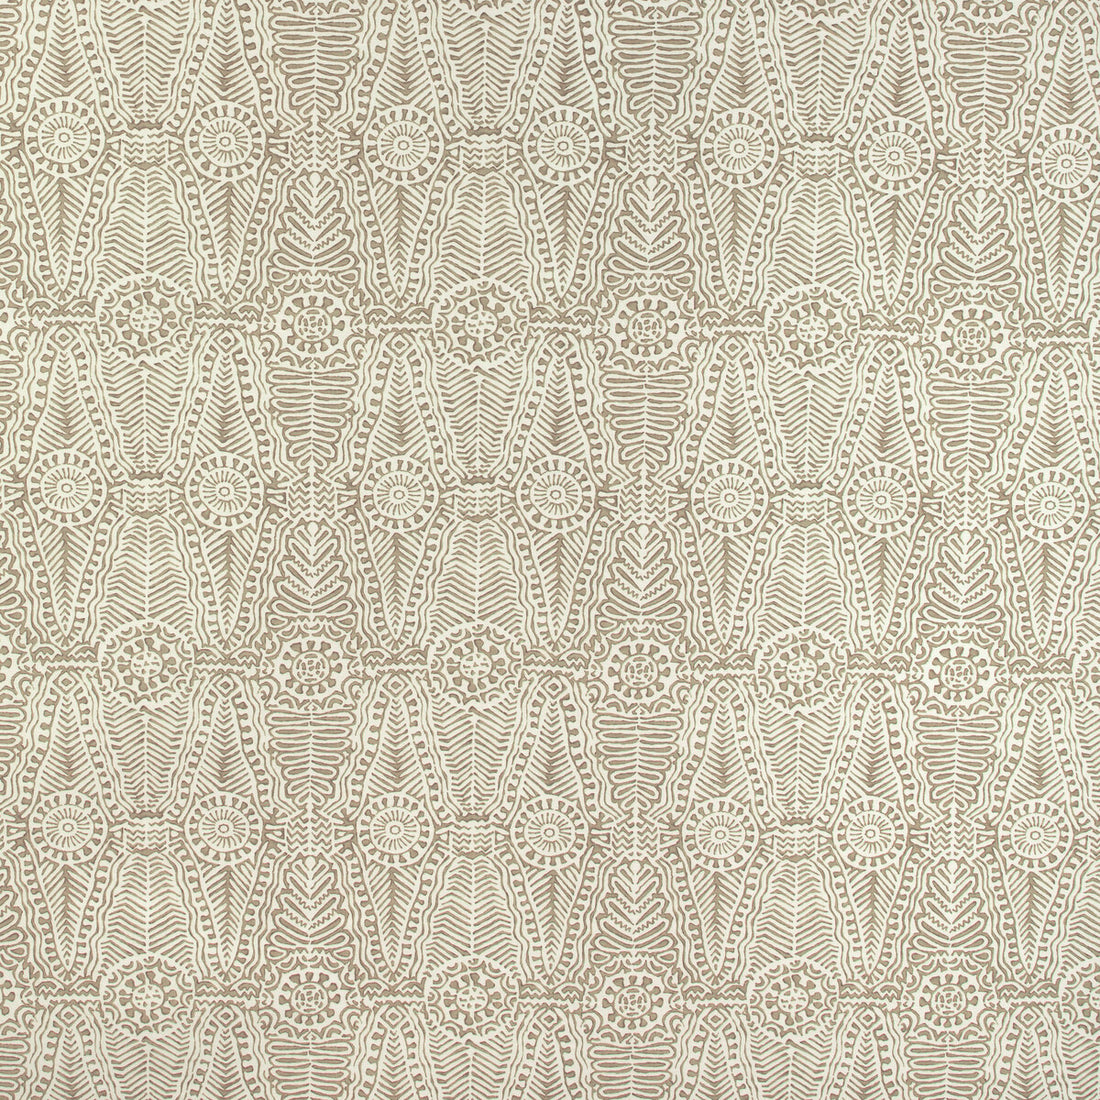 Drayton Print fabric in buff color - pattern 2020184.116.0 - by Lee Jofa in the Clare Prints collection